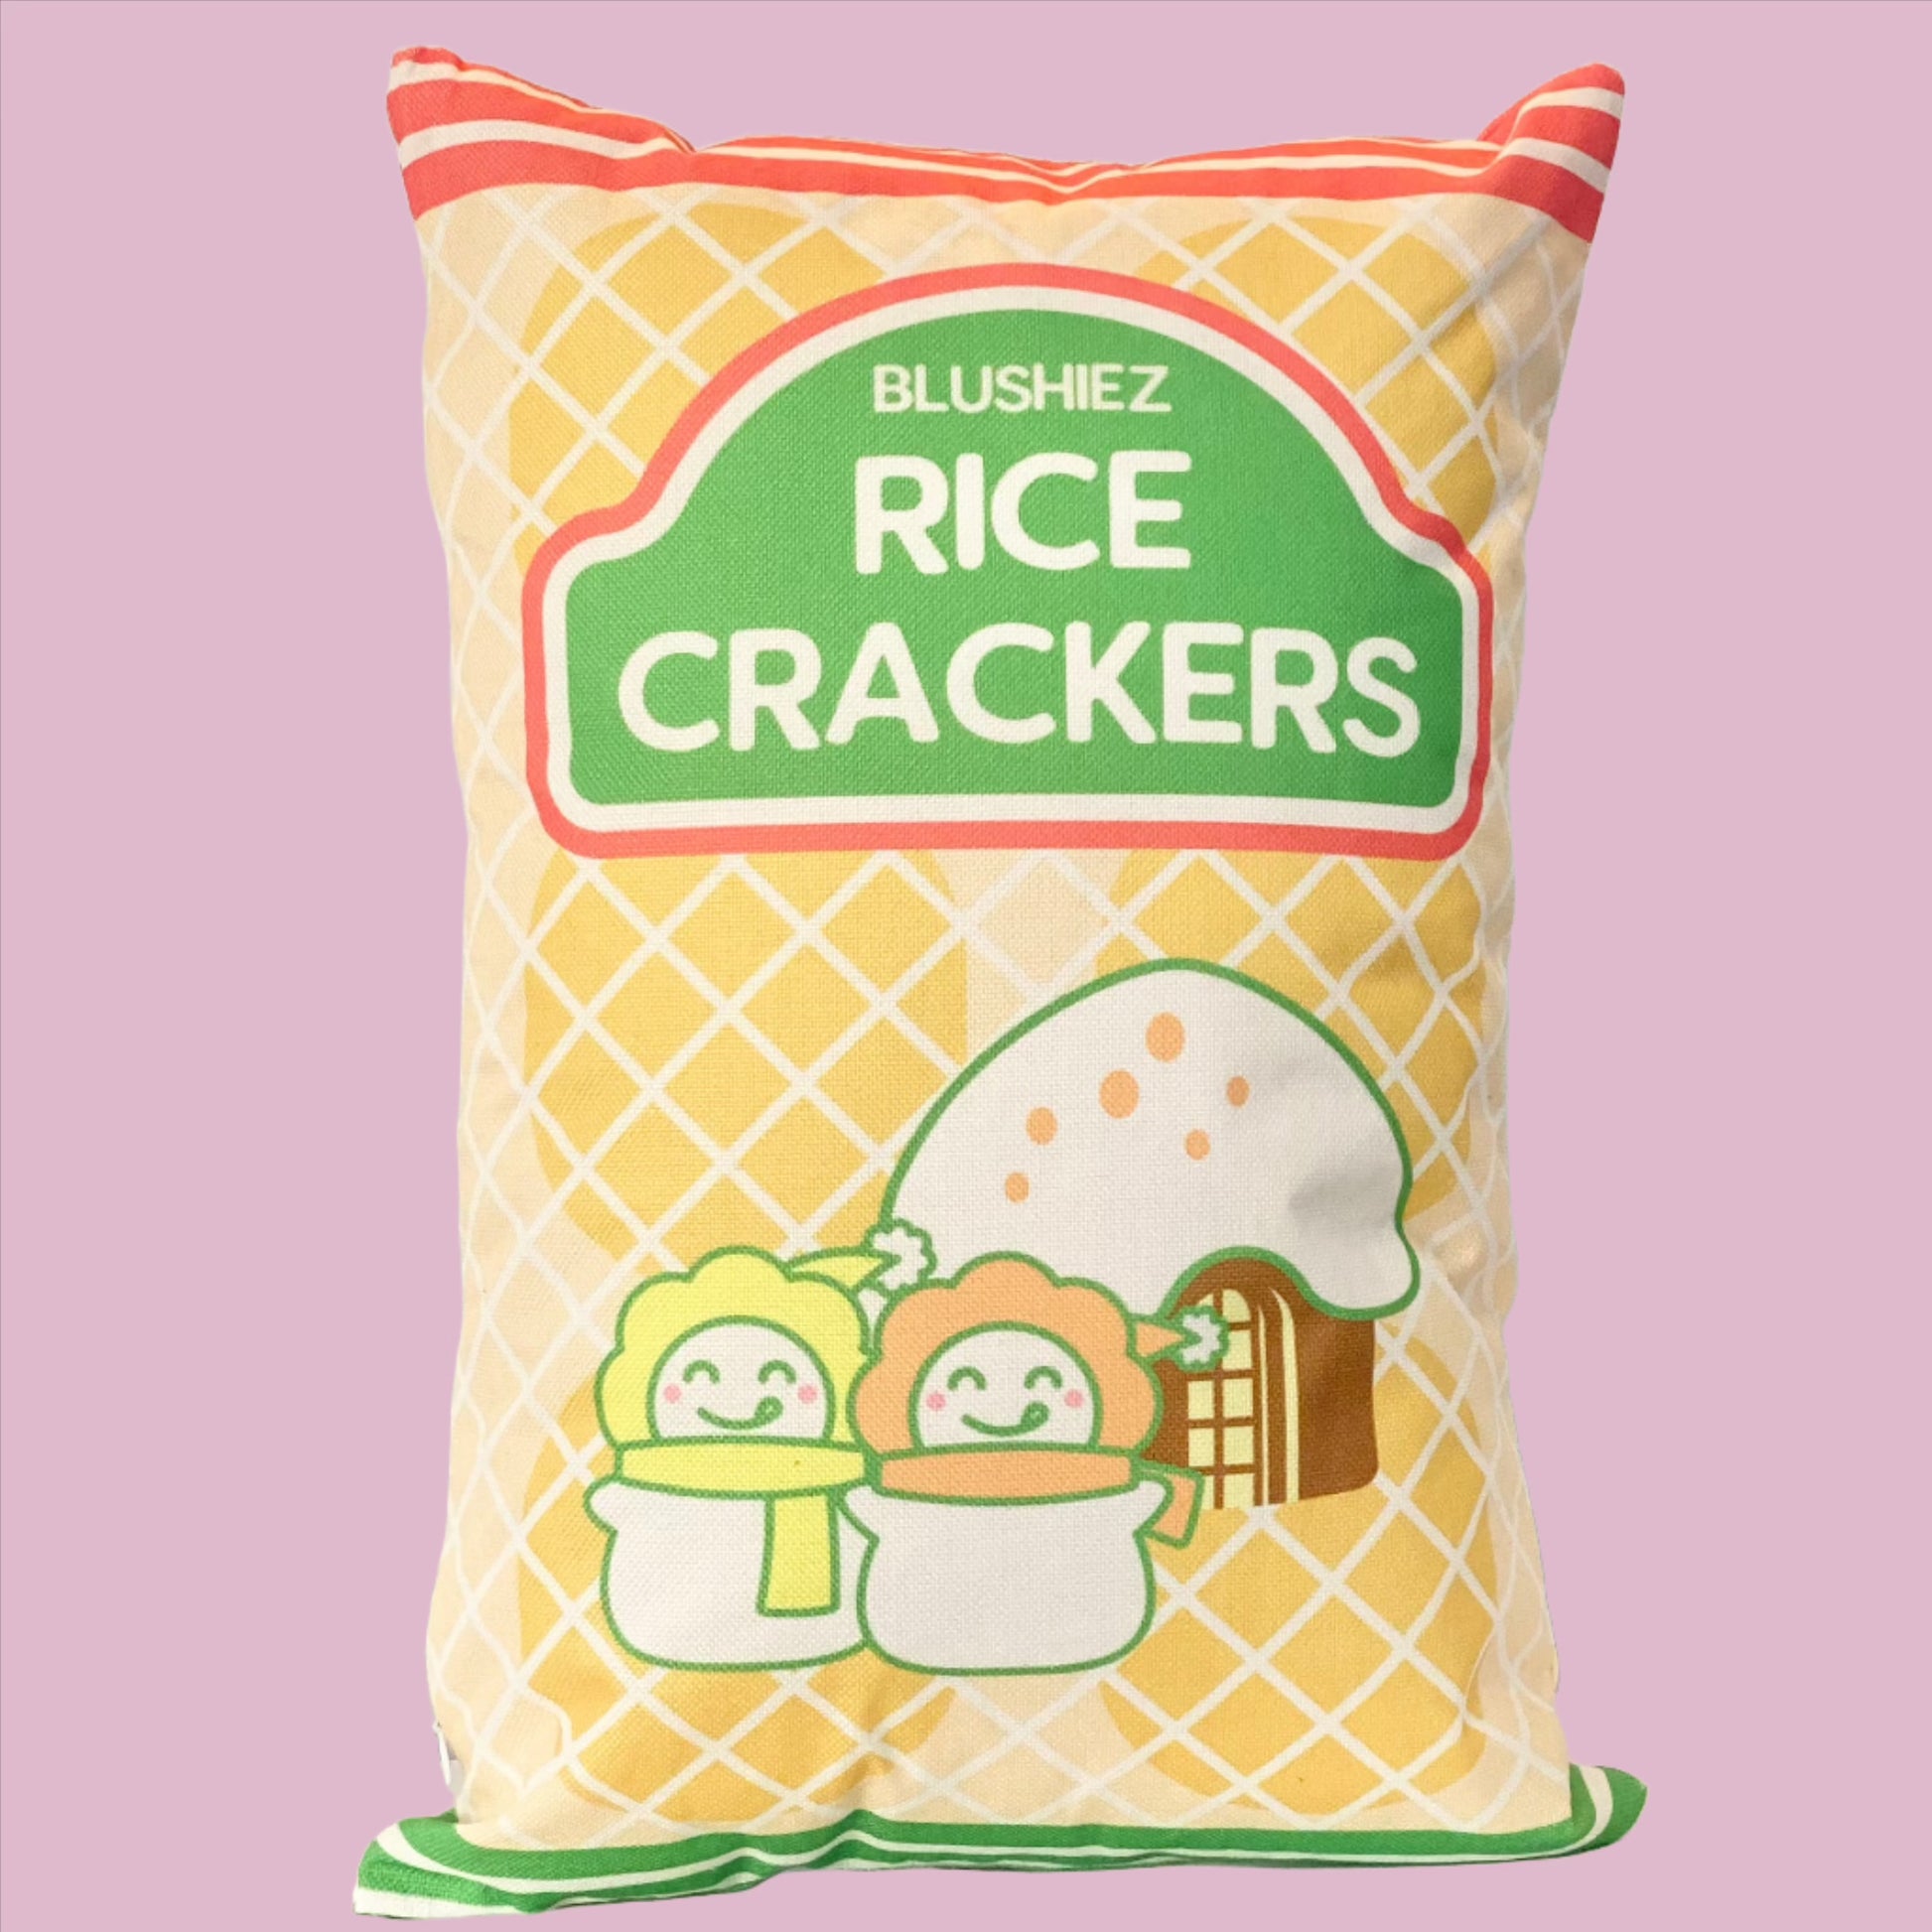 Pillow with a festive snack-inspired design. The pillow features a light orange background resembling rice crackers, with orange stripes at the top and green stripes at the bottom. The design includes a charming scene of two snowmen in front of a house with a snowy roof, evoking a festive and wintery atmosphere.